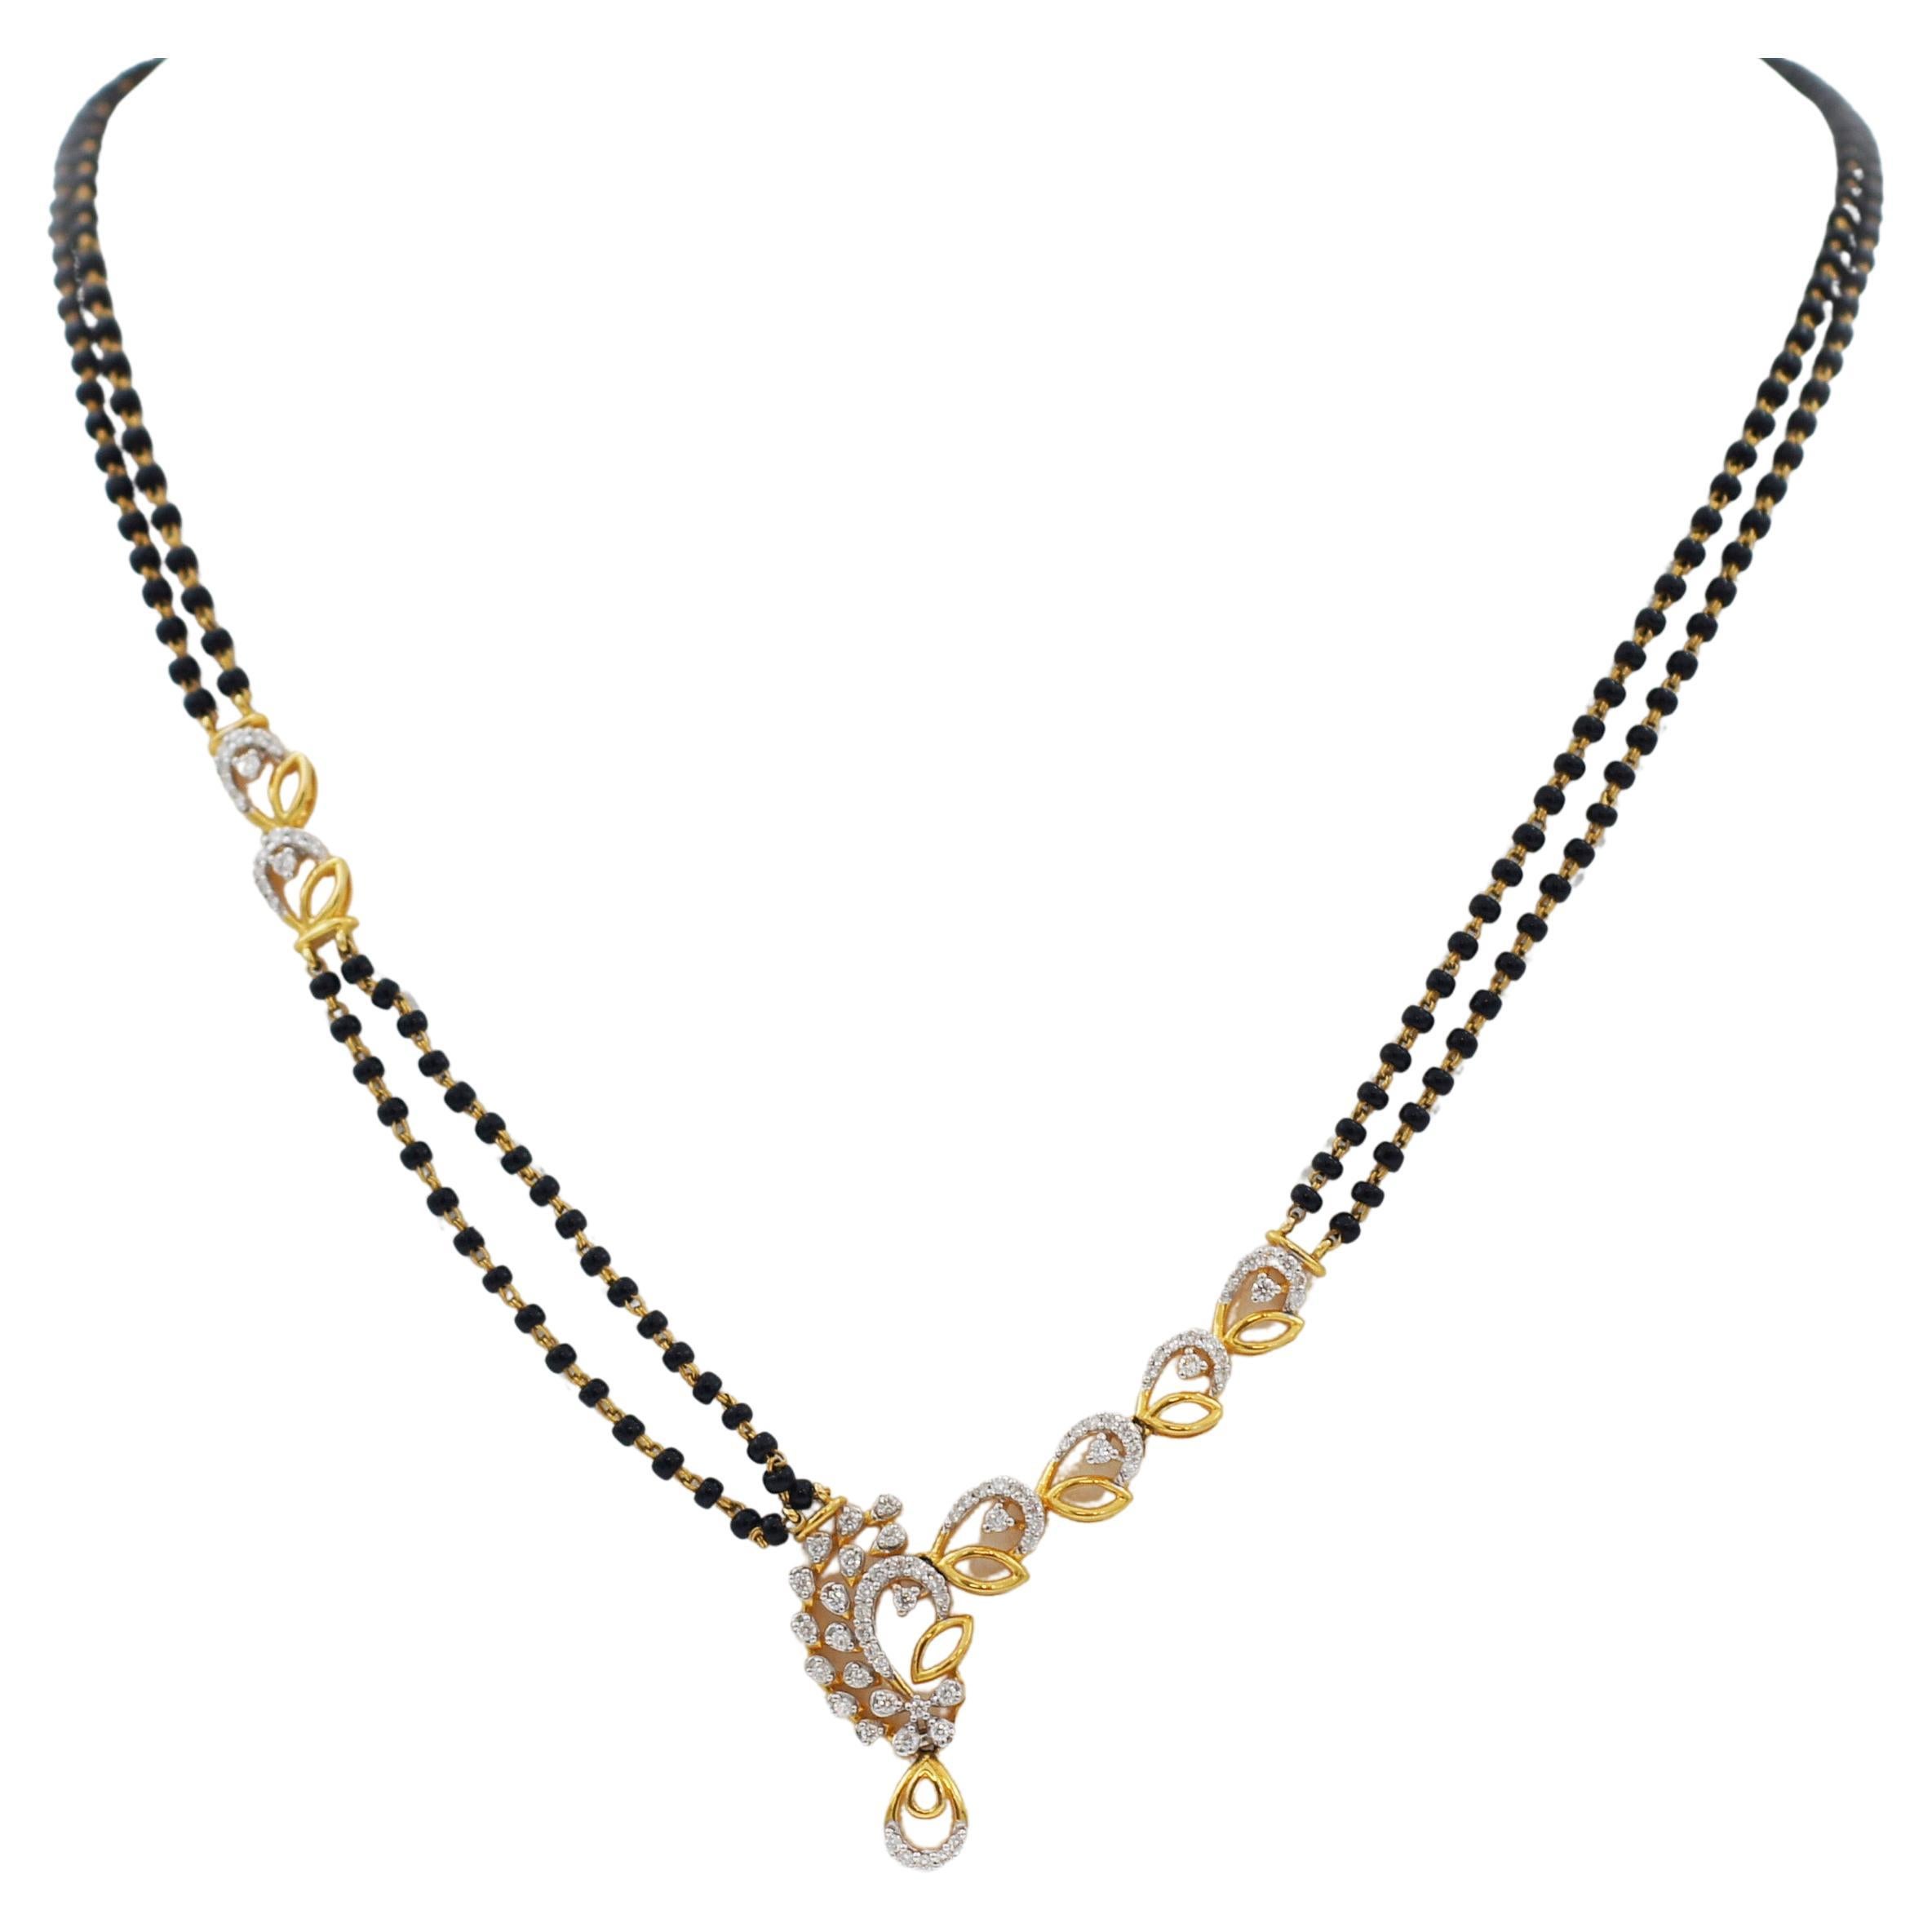 22k Indian Yellow Gold Diamonds and Black Bead Mangalsutra Necklace For Sale